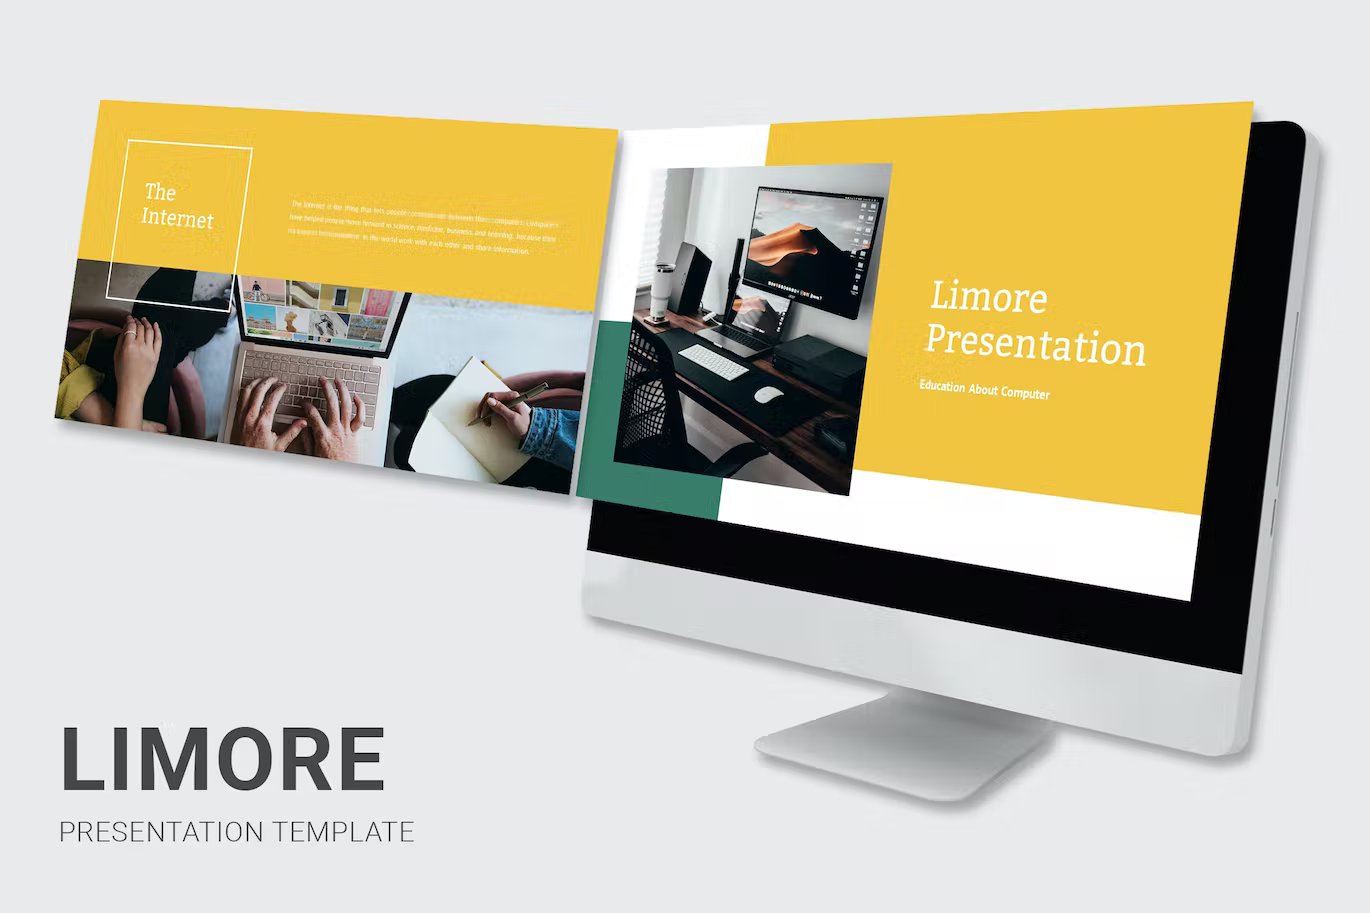 Black lettering "Limore Presentation Template" and mockup IMac with presentation template in white, green and yellow on a gray background.